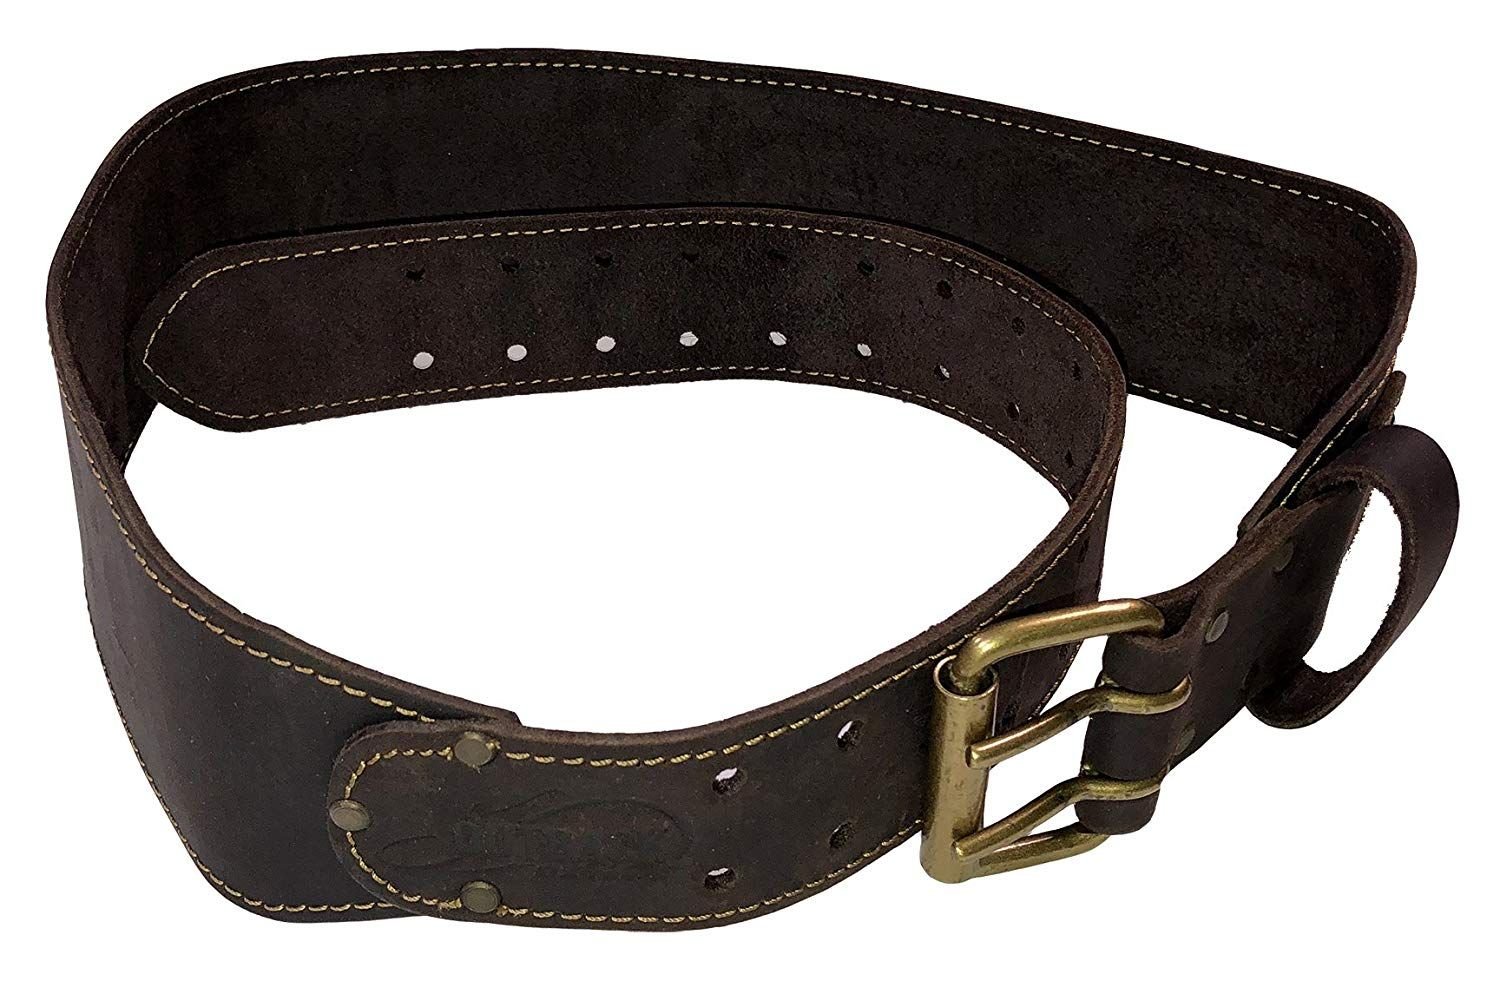 OX-P263305 - OX PRO 3-INCH TOOL BELT | OIL-TANNED LEATHER-XXLG